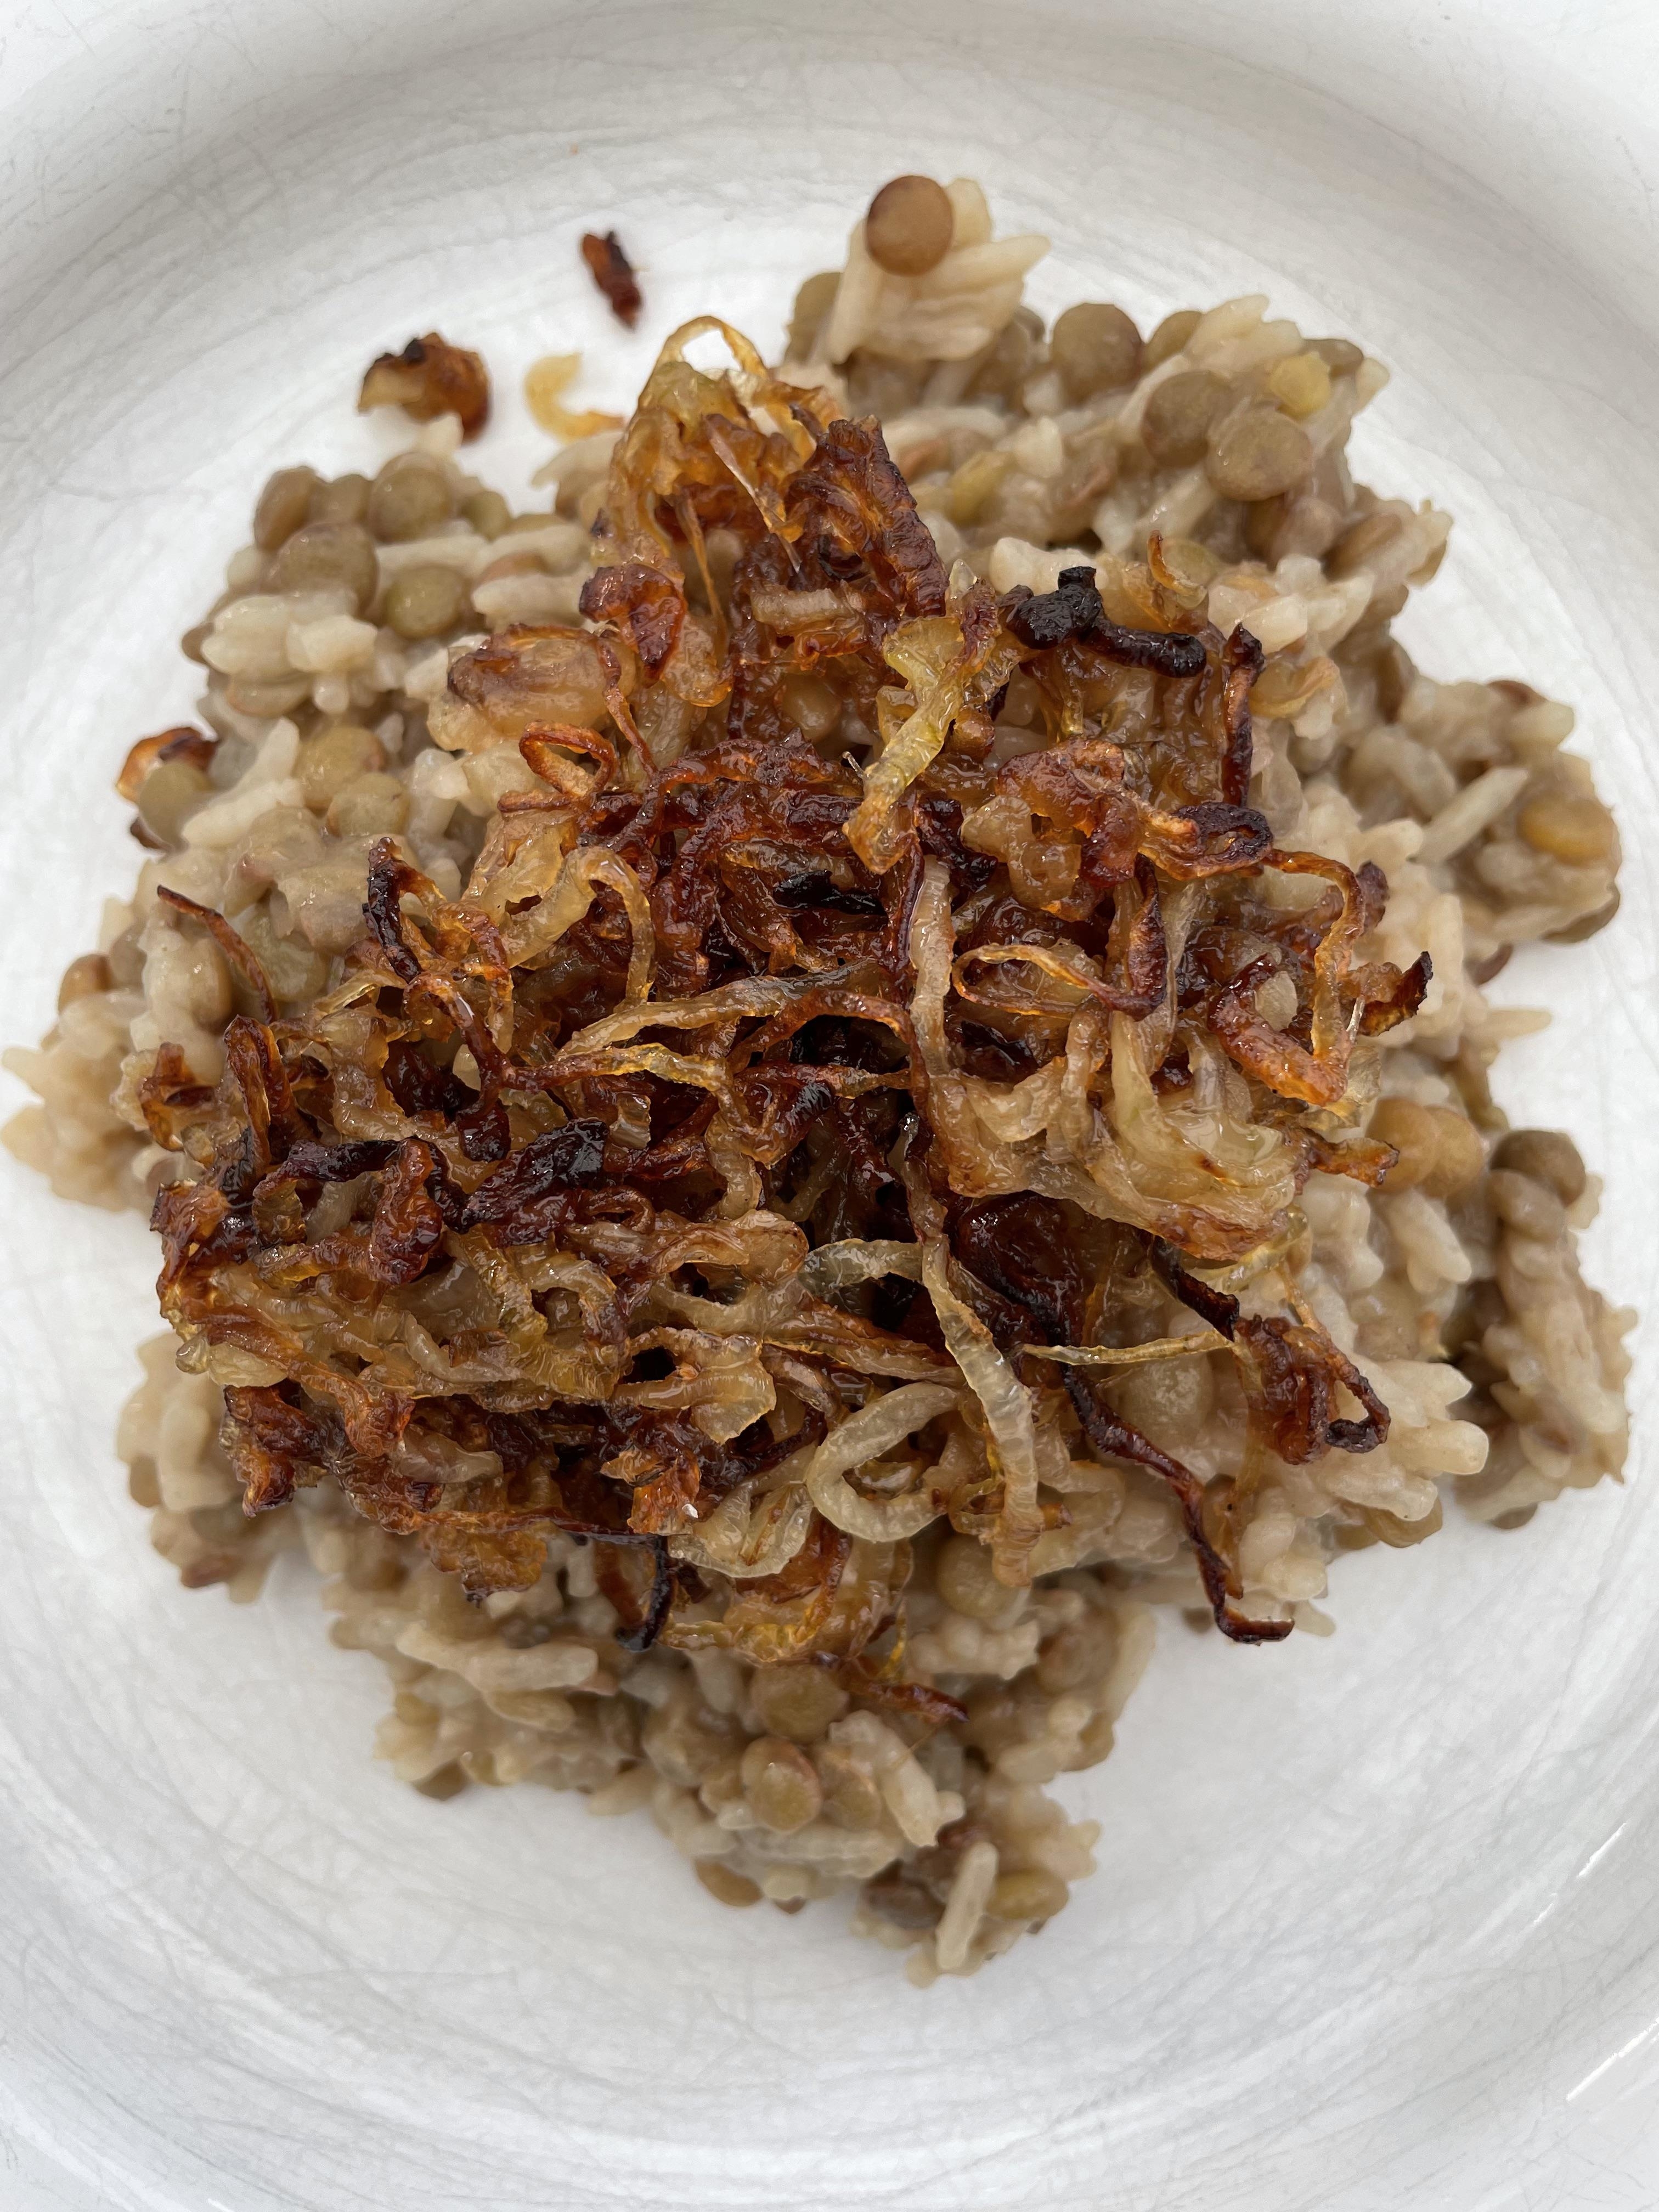 A plate of cooked grains topped with crispy fried onions